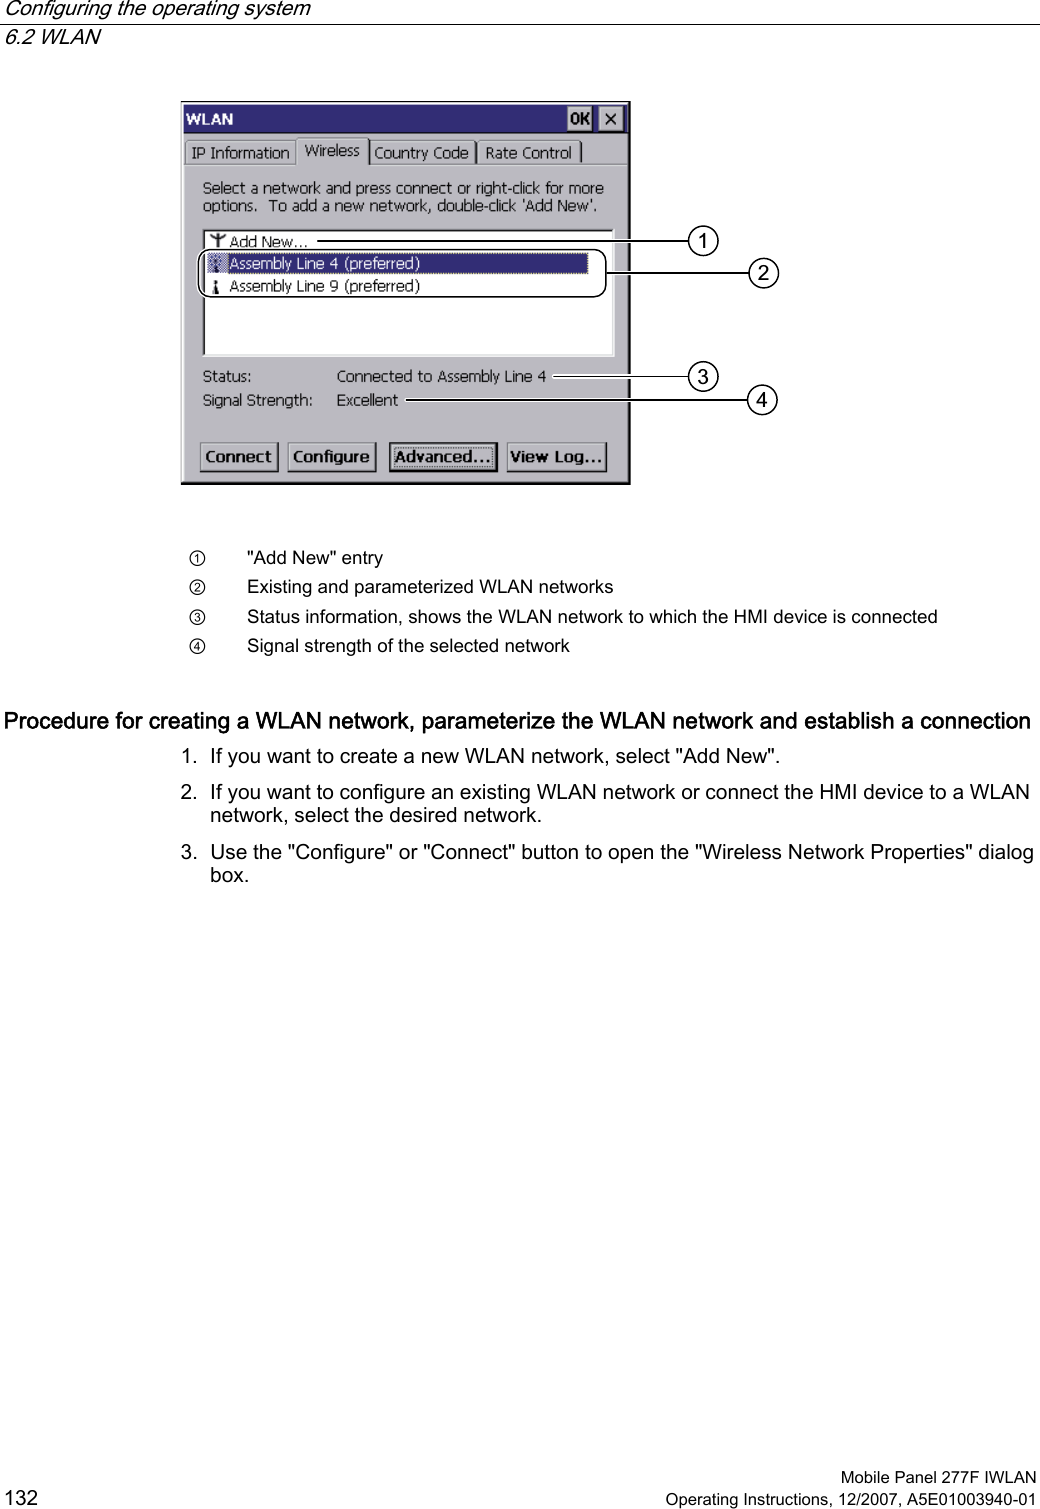 Configuring the operating system   6.2 WLAN  Mobile Panel 277F IWLAN 132 Operating Instructions, 12/2007, A5E01003940-01    ①  &quot;Add New&quot; entry ②  Existing and parameterized WLAN networks ③  Status information, shows the WLAN network to which the HMI device is connected ④  Signal strength of the selected network Procedure for creating a WLAN network, parameterize the WLAN network and establish a connection 1. If you want to create a new WLAN network, select &quot;Add New&quot;. 2. If you want to configure an existing WLAN network or connect the HMI device to a WLAN network, select the desired network. 3. Use the &quot;Configure&quot; or &quot;Connect&quot; button to open the &quot;Wireless Network Properties&quot; dialog box. 